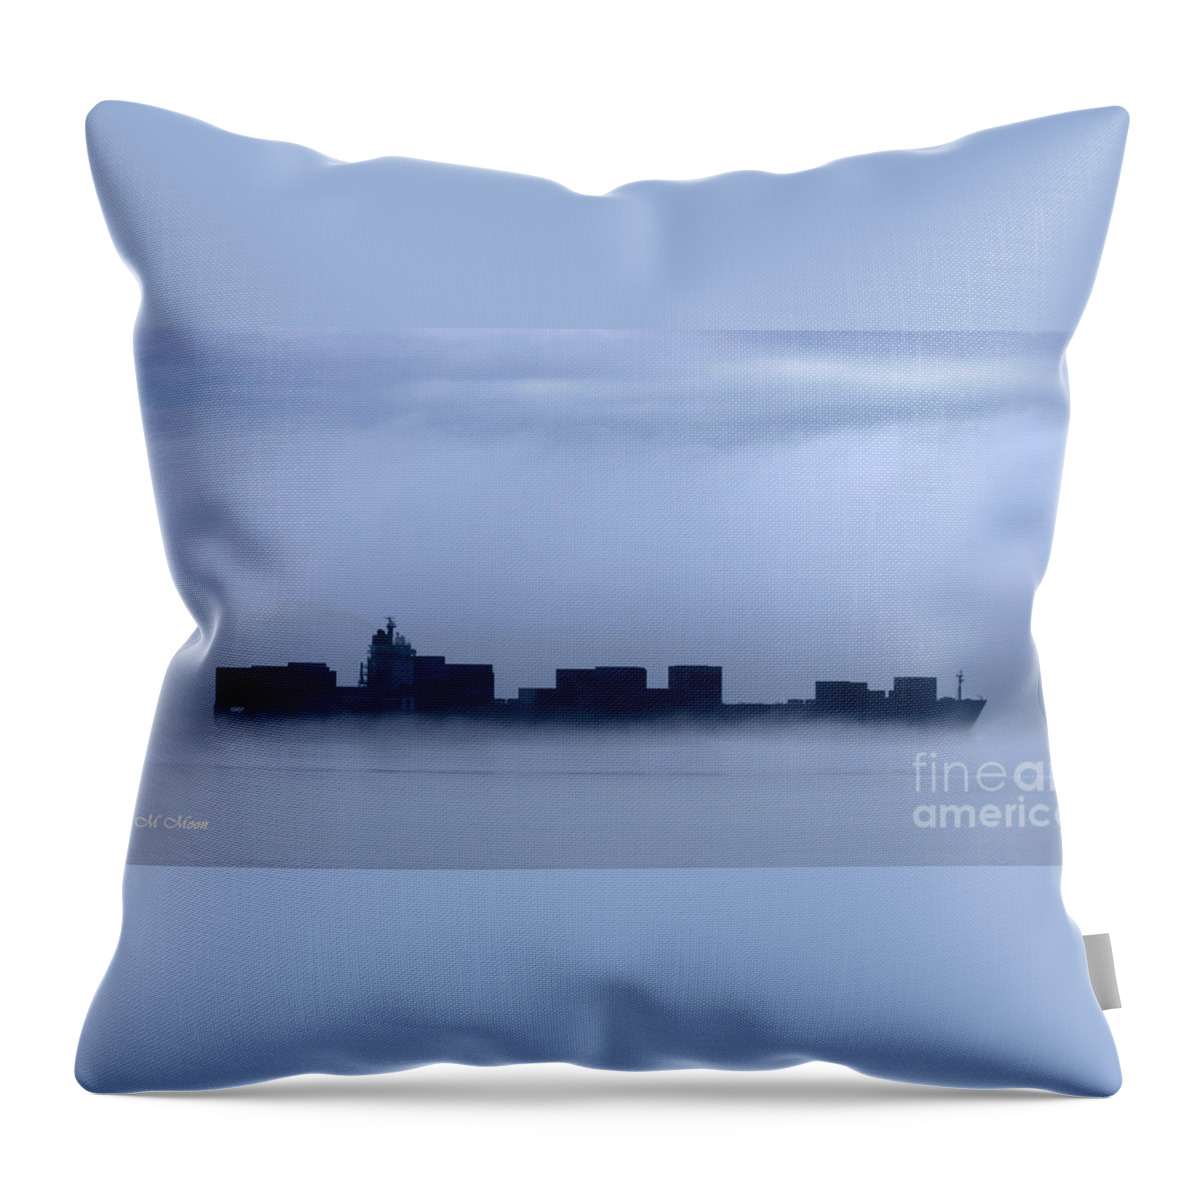 Ship Throw Pillow featuring the photograph Cloud Ship by Tap On Photo